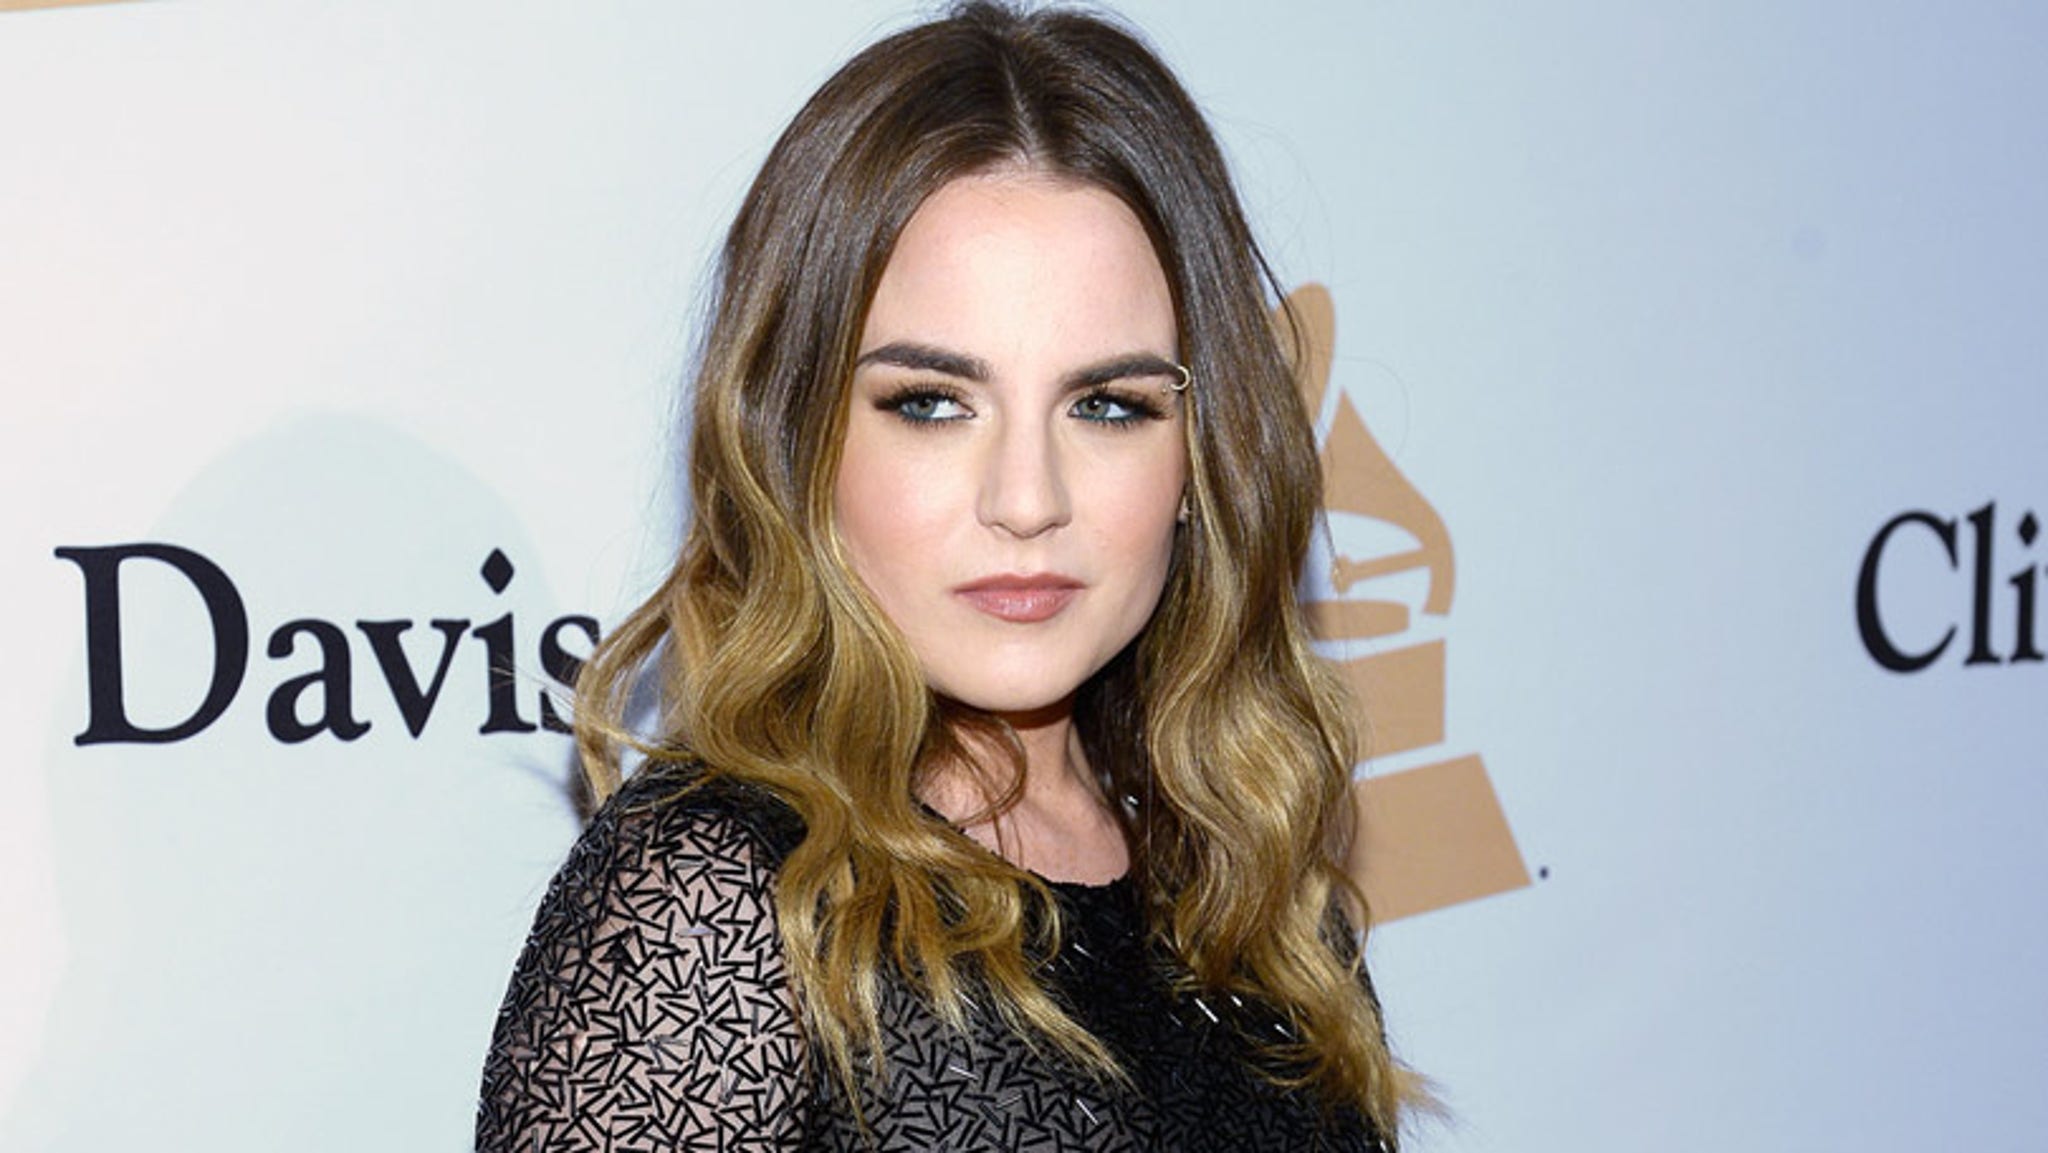 Jojo Talks About Weight Loss Pressure and Extreme Dieting